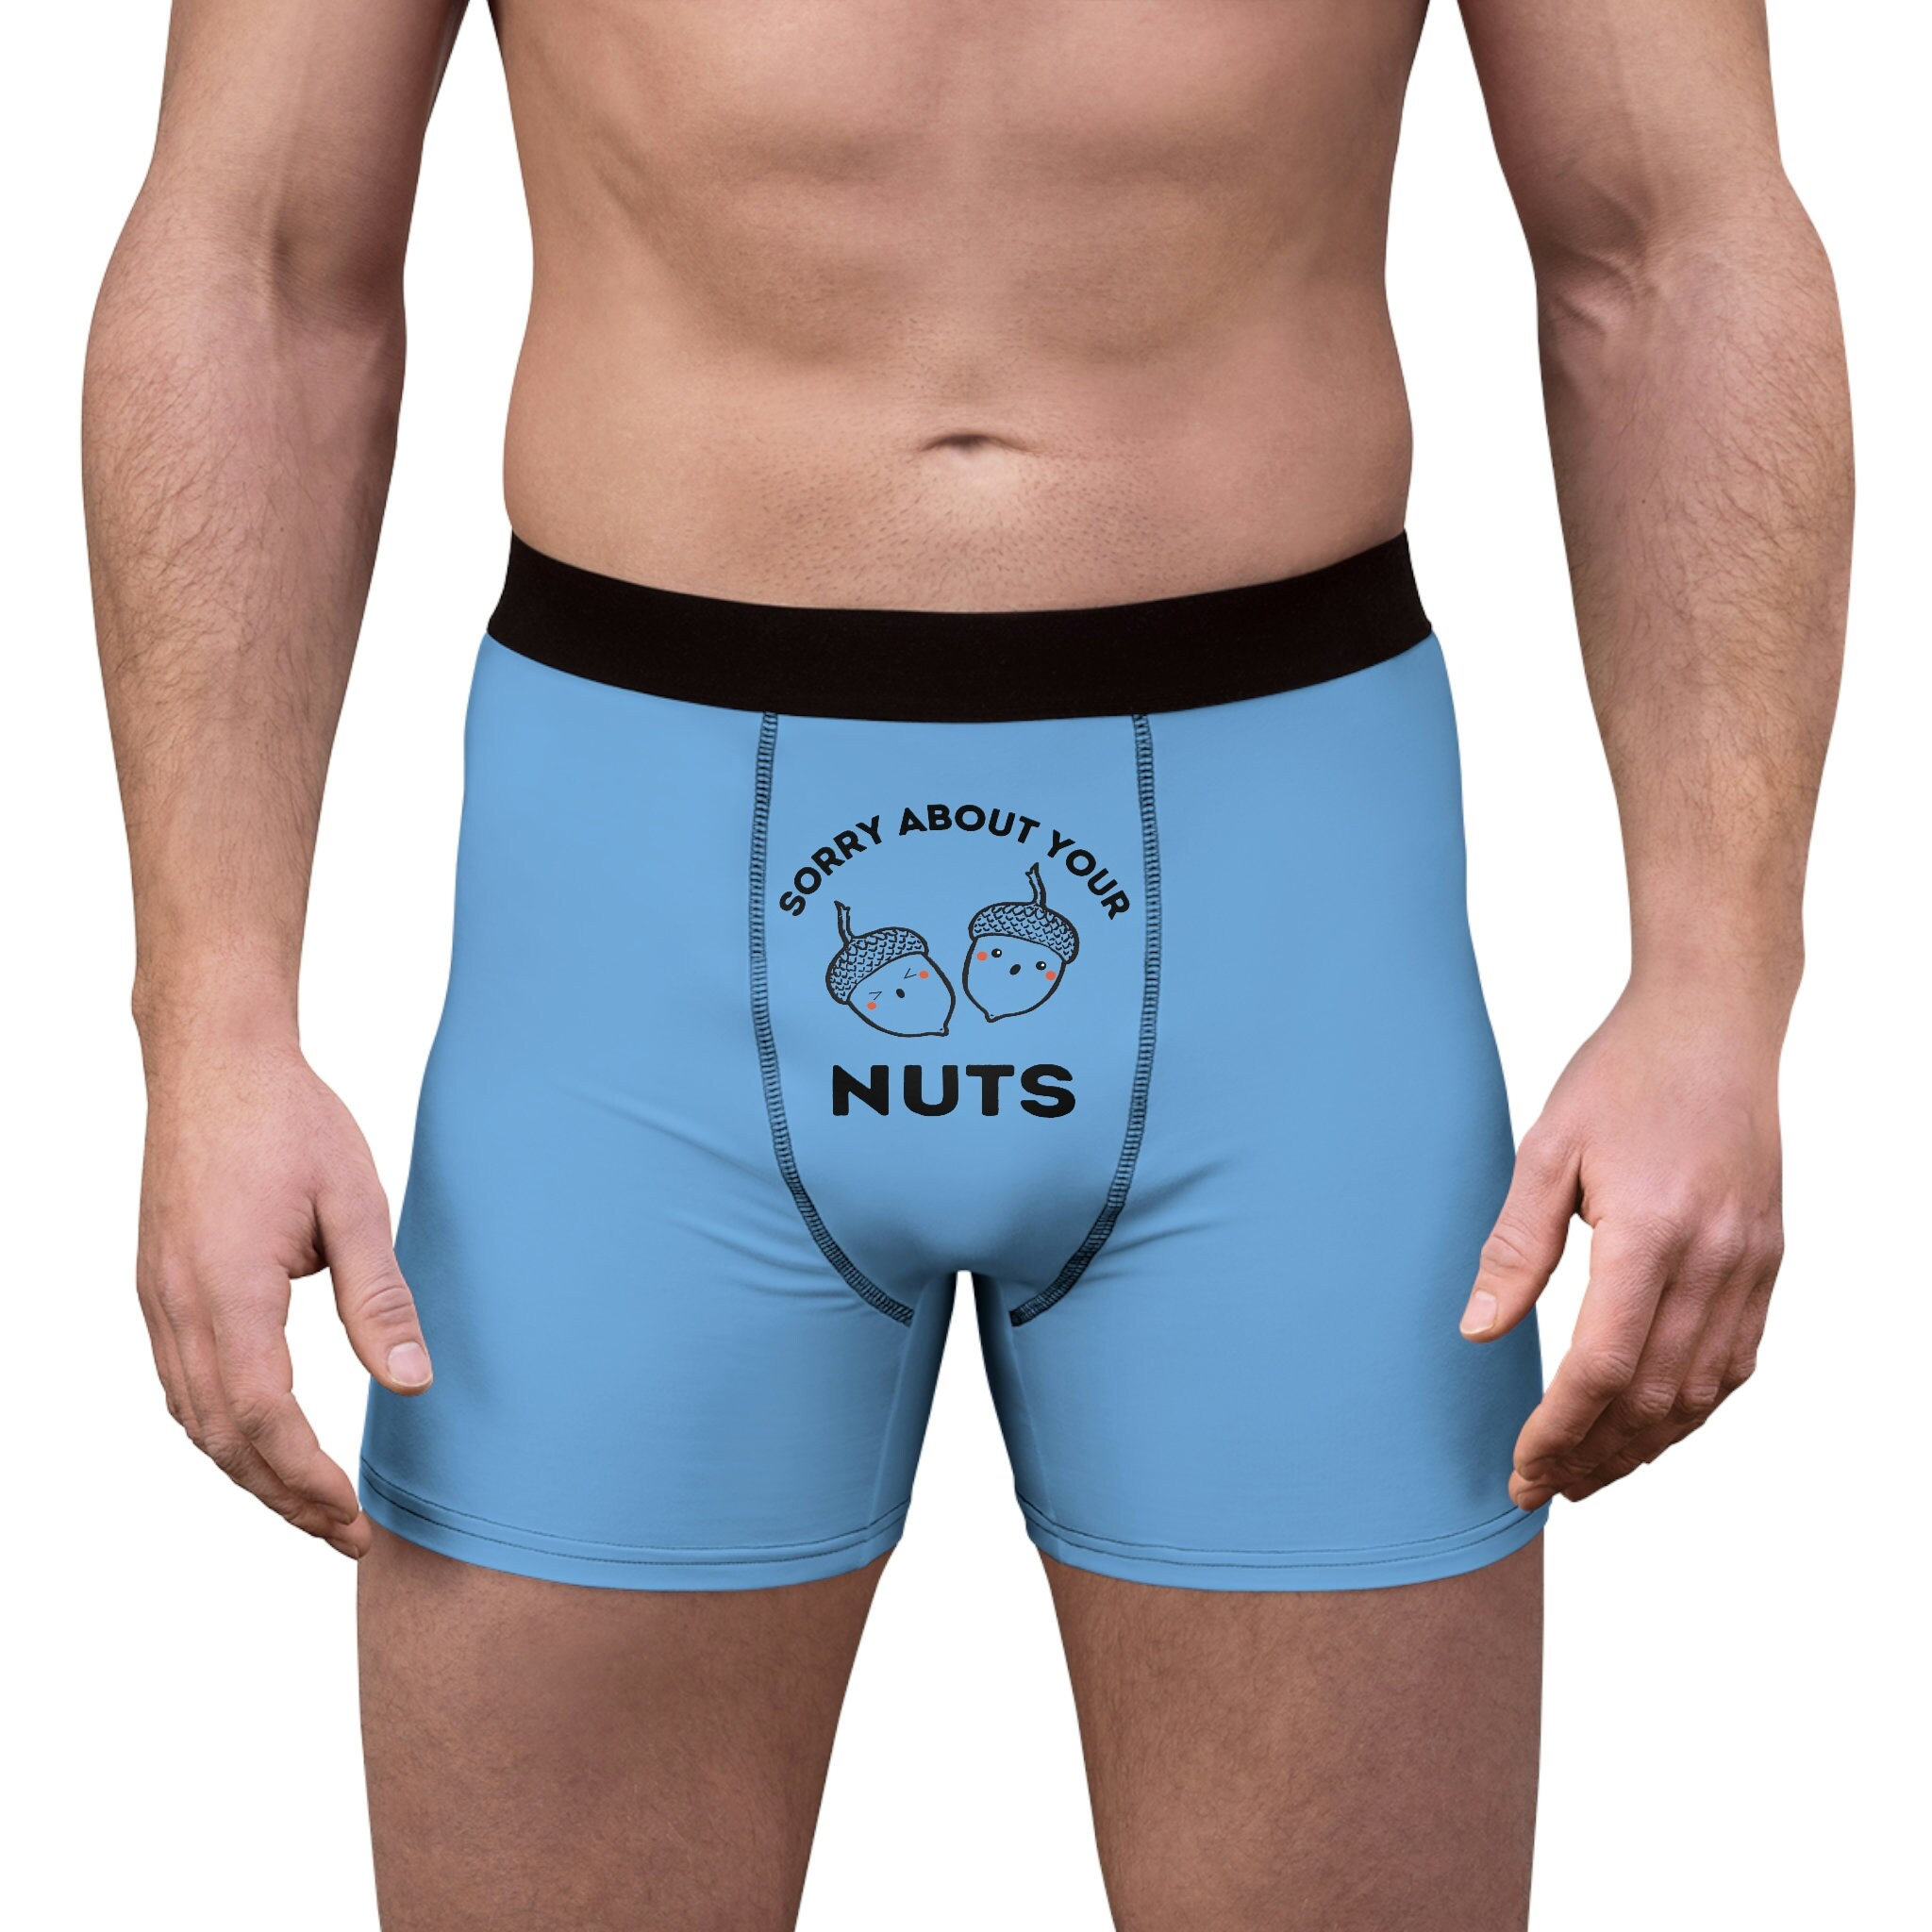 For Recreational Use Only Boxer Briefs, Free Shipping, Funny Vasectomy  Gift, Men's Vasectomy Underwear 